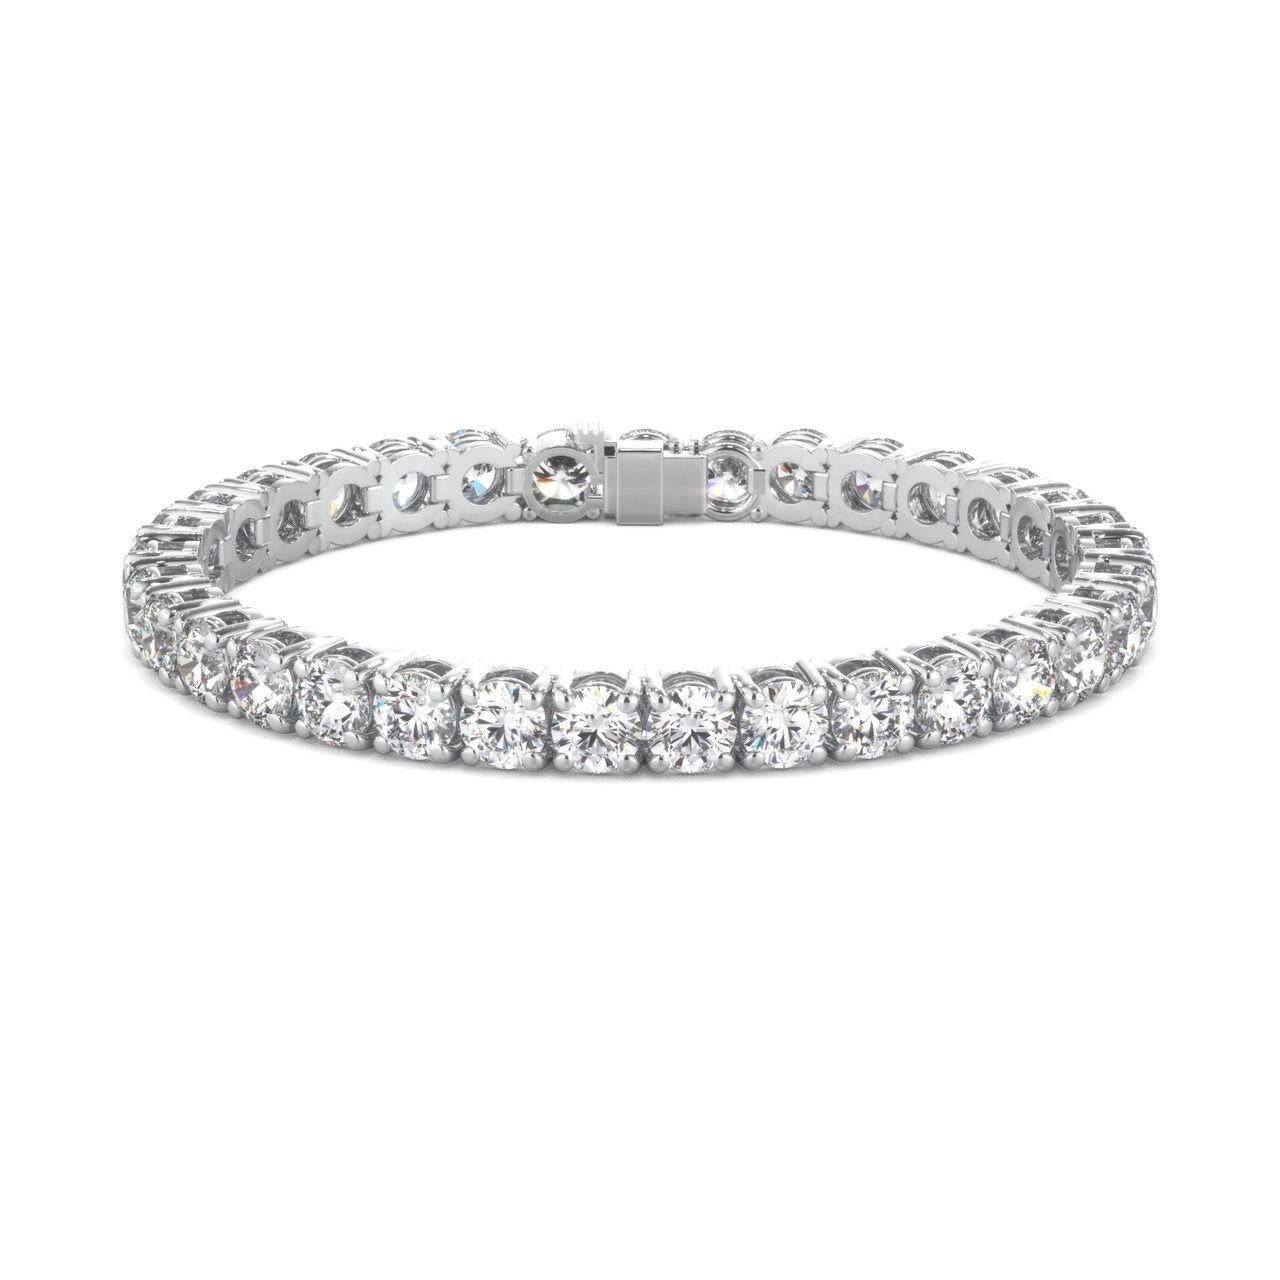 This marvelous diamond tennis bracelet has a pleasing 4 prong airline design. It also features round diamonds totaling 5.50 carats
F COLOR
VS1/VS2 CLARITY

long 7.5 inches 